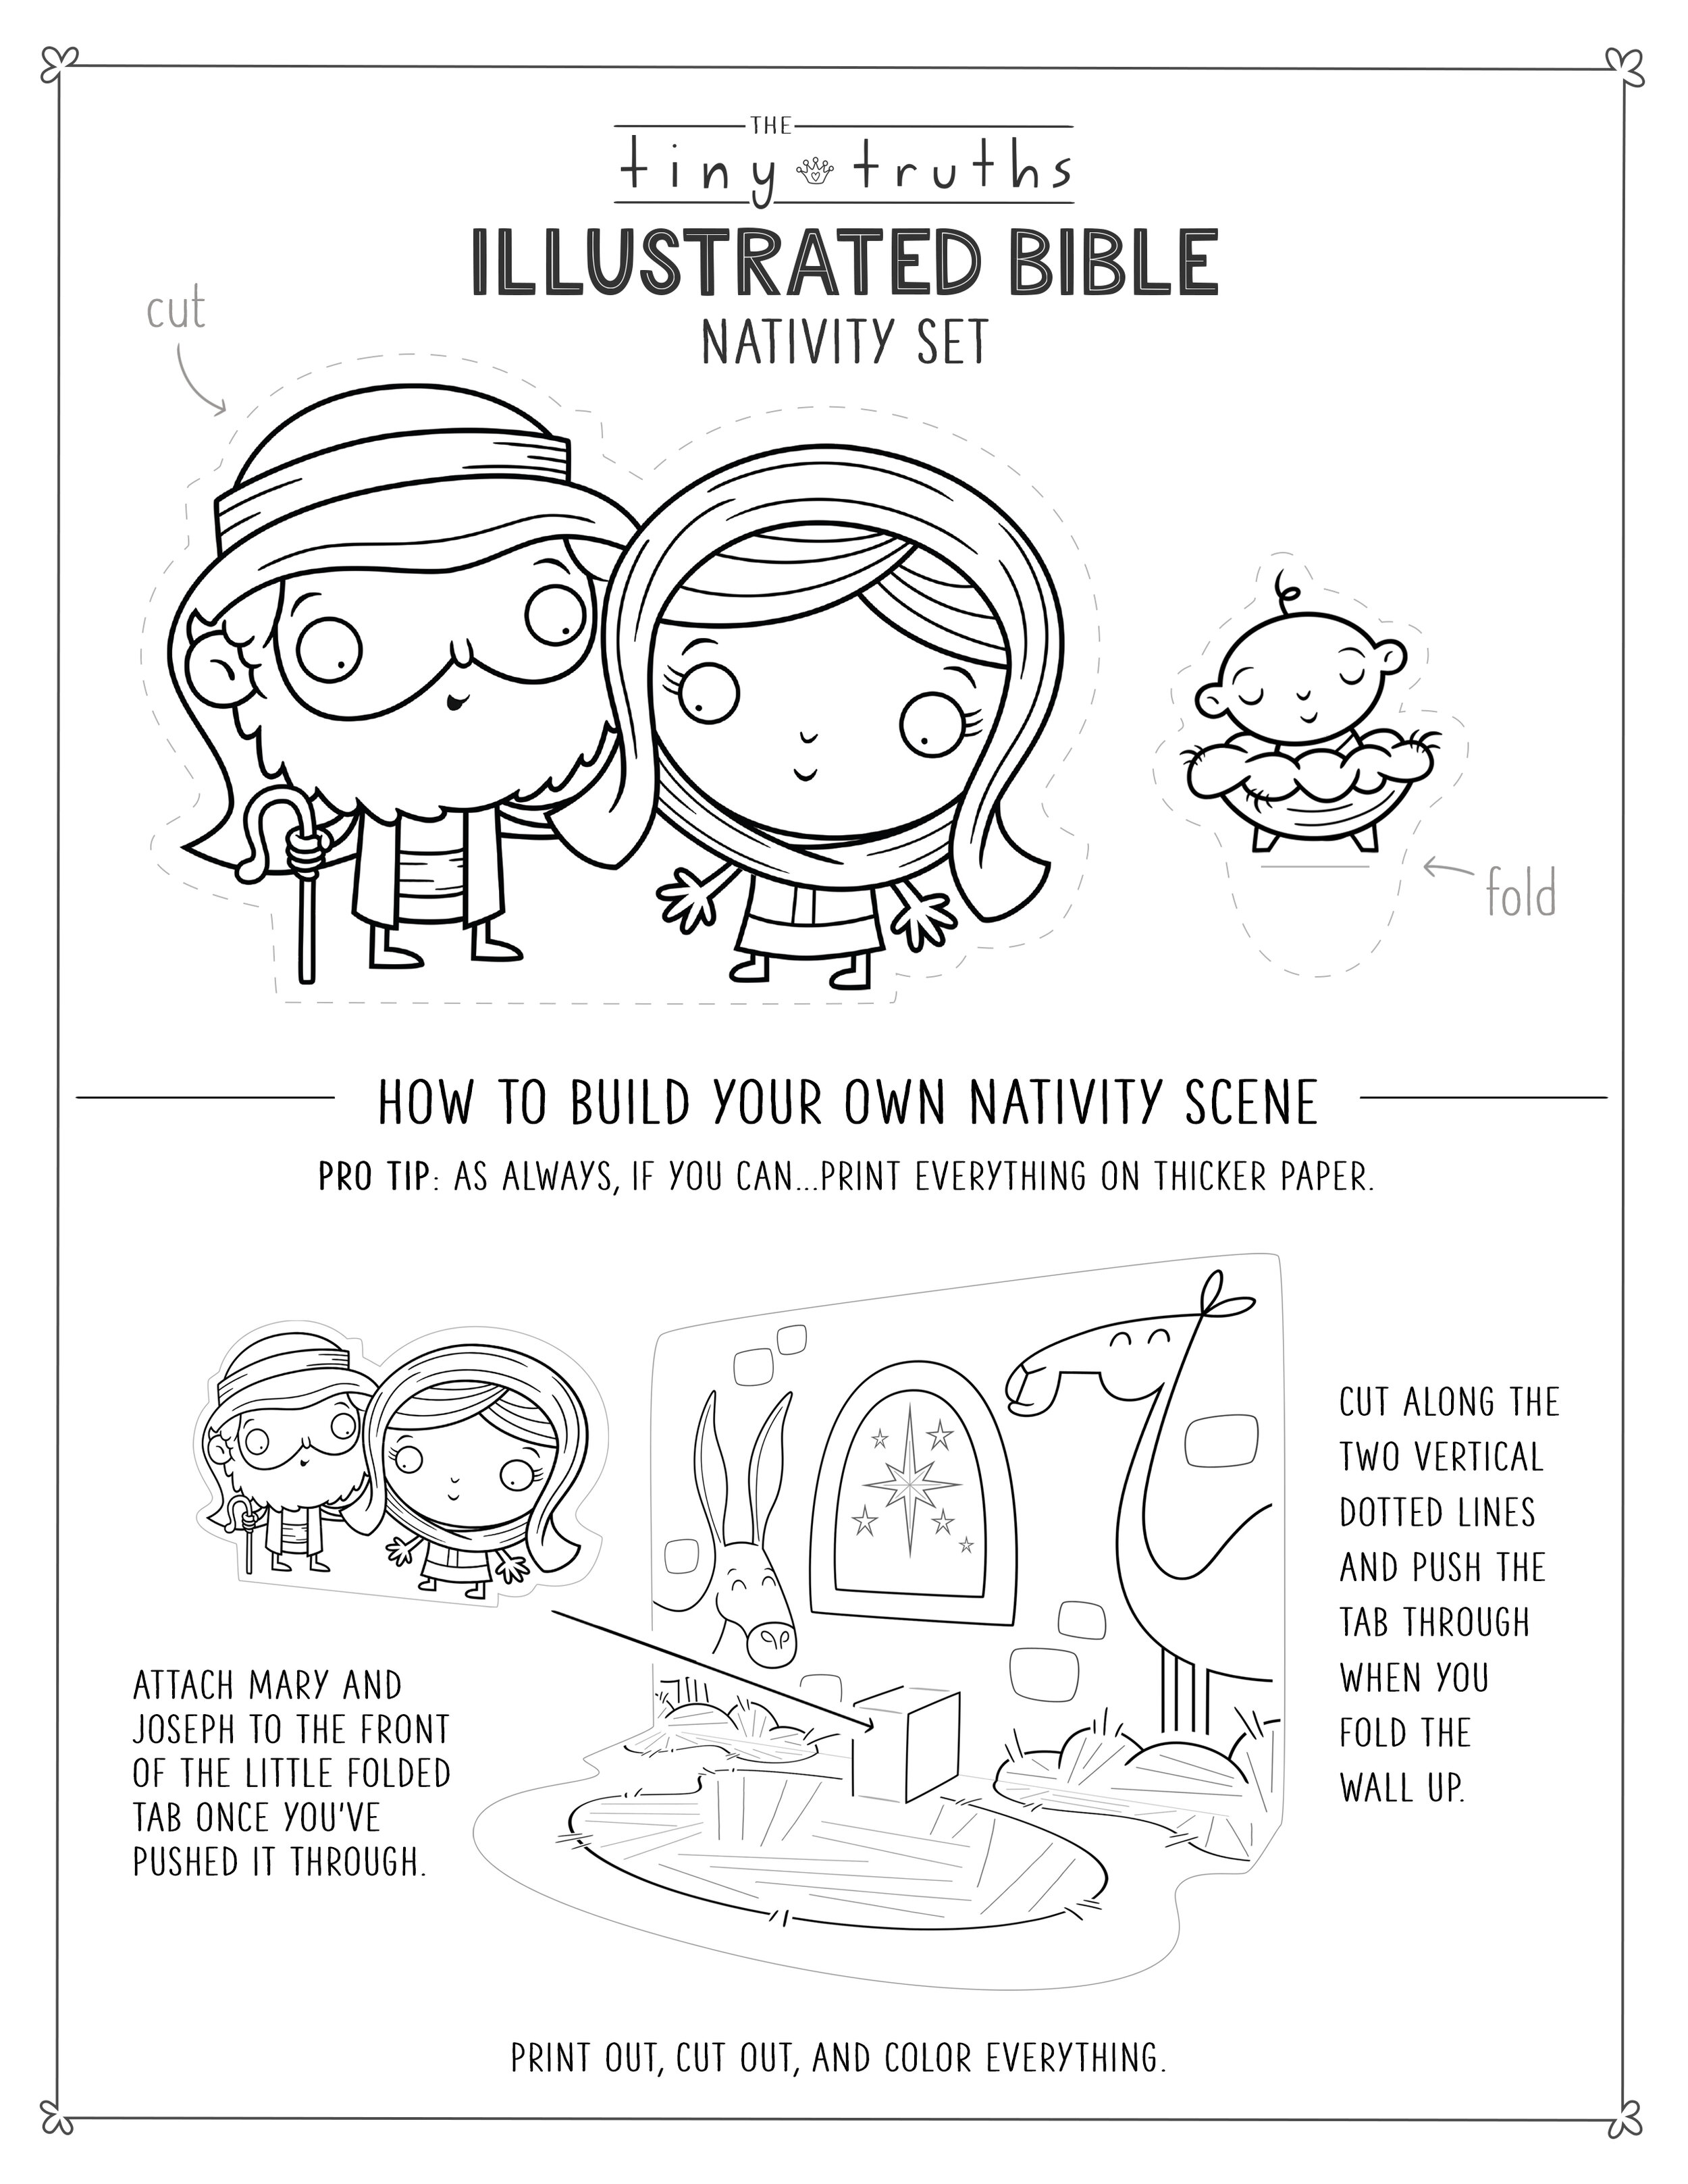 Tiny truths illustrated bible christmas coloring and crafts â tiny truths illustrated bible